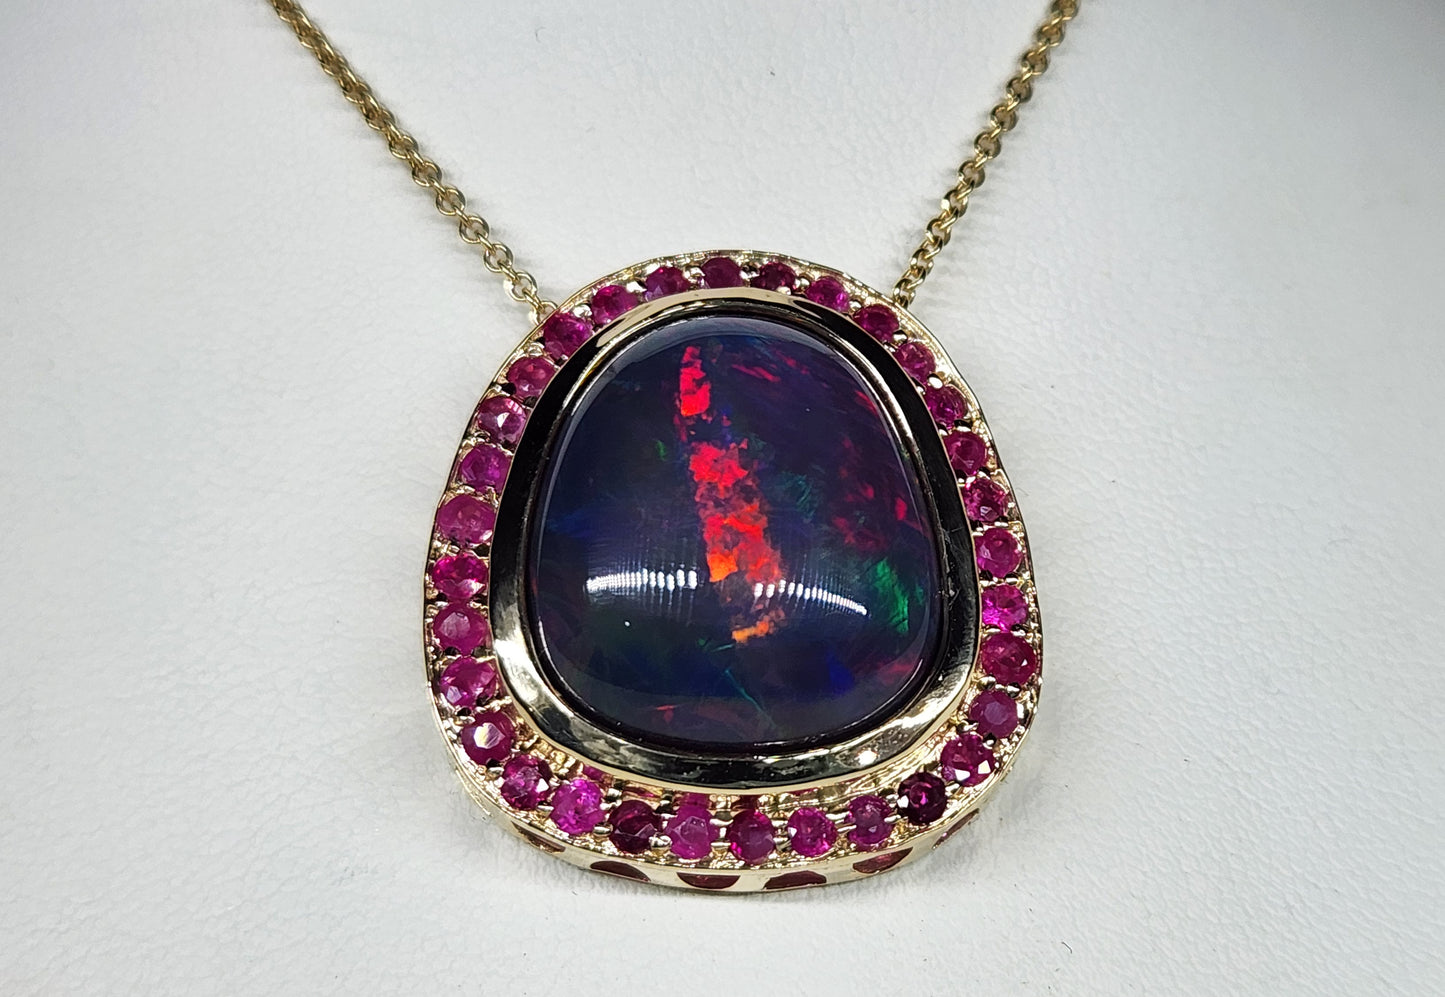 Black Opal & Ruby Pendant 14k Yellow Gold Necklace #397